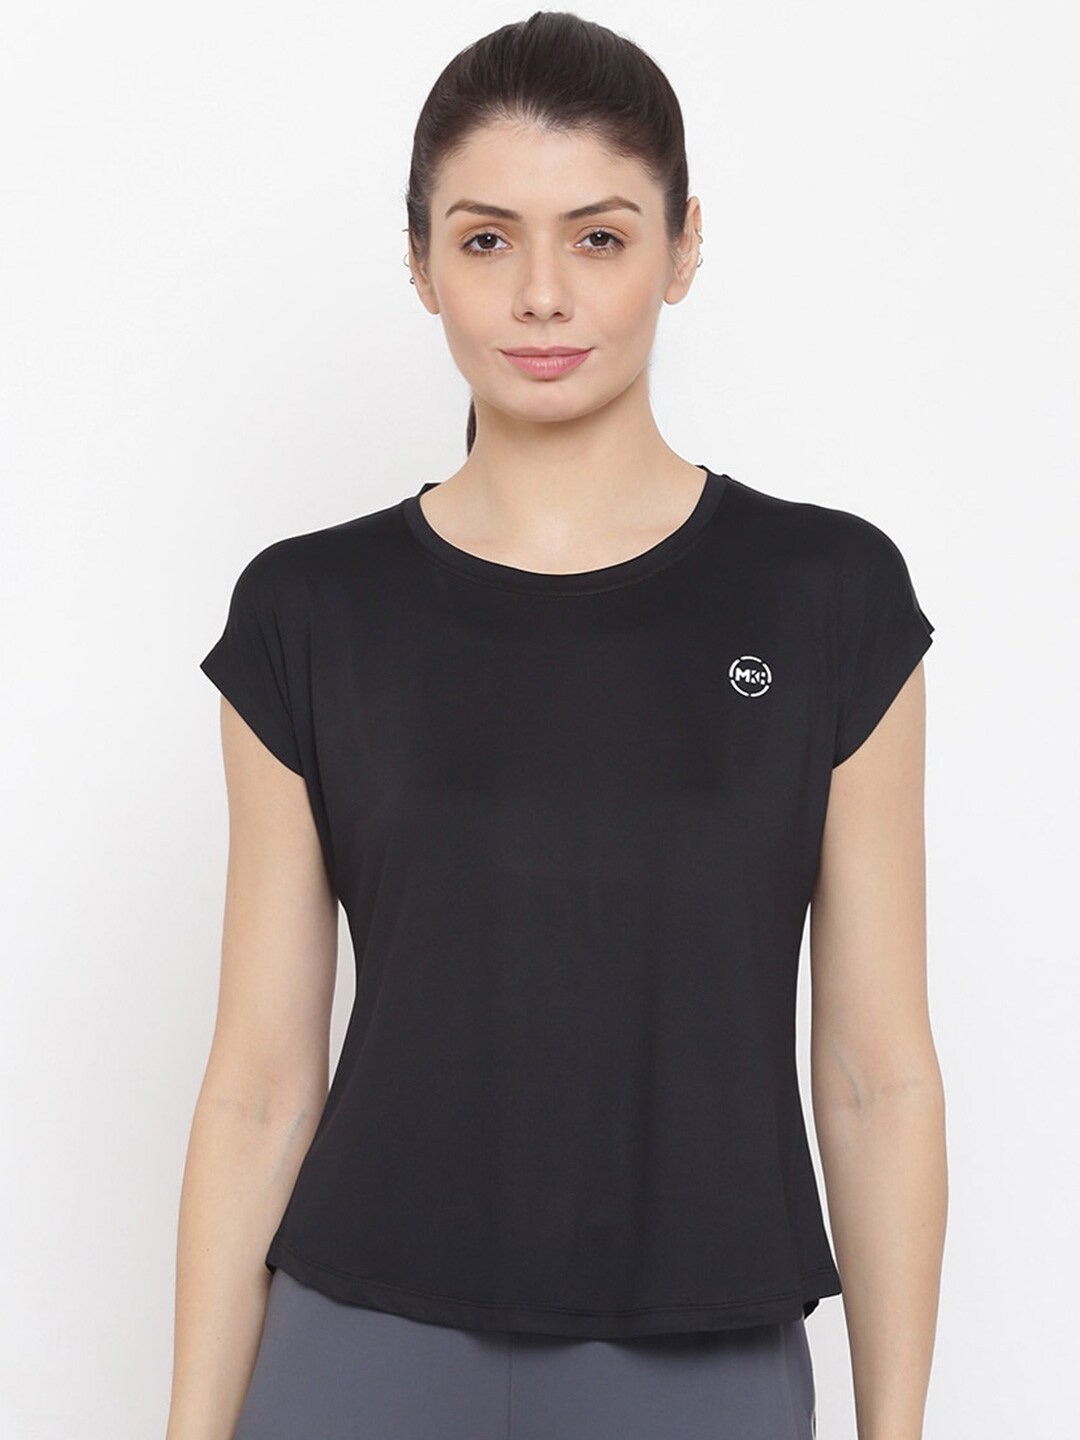 MKH Women Black Extended Sleeves Dri-FIT T-shirt Price in India